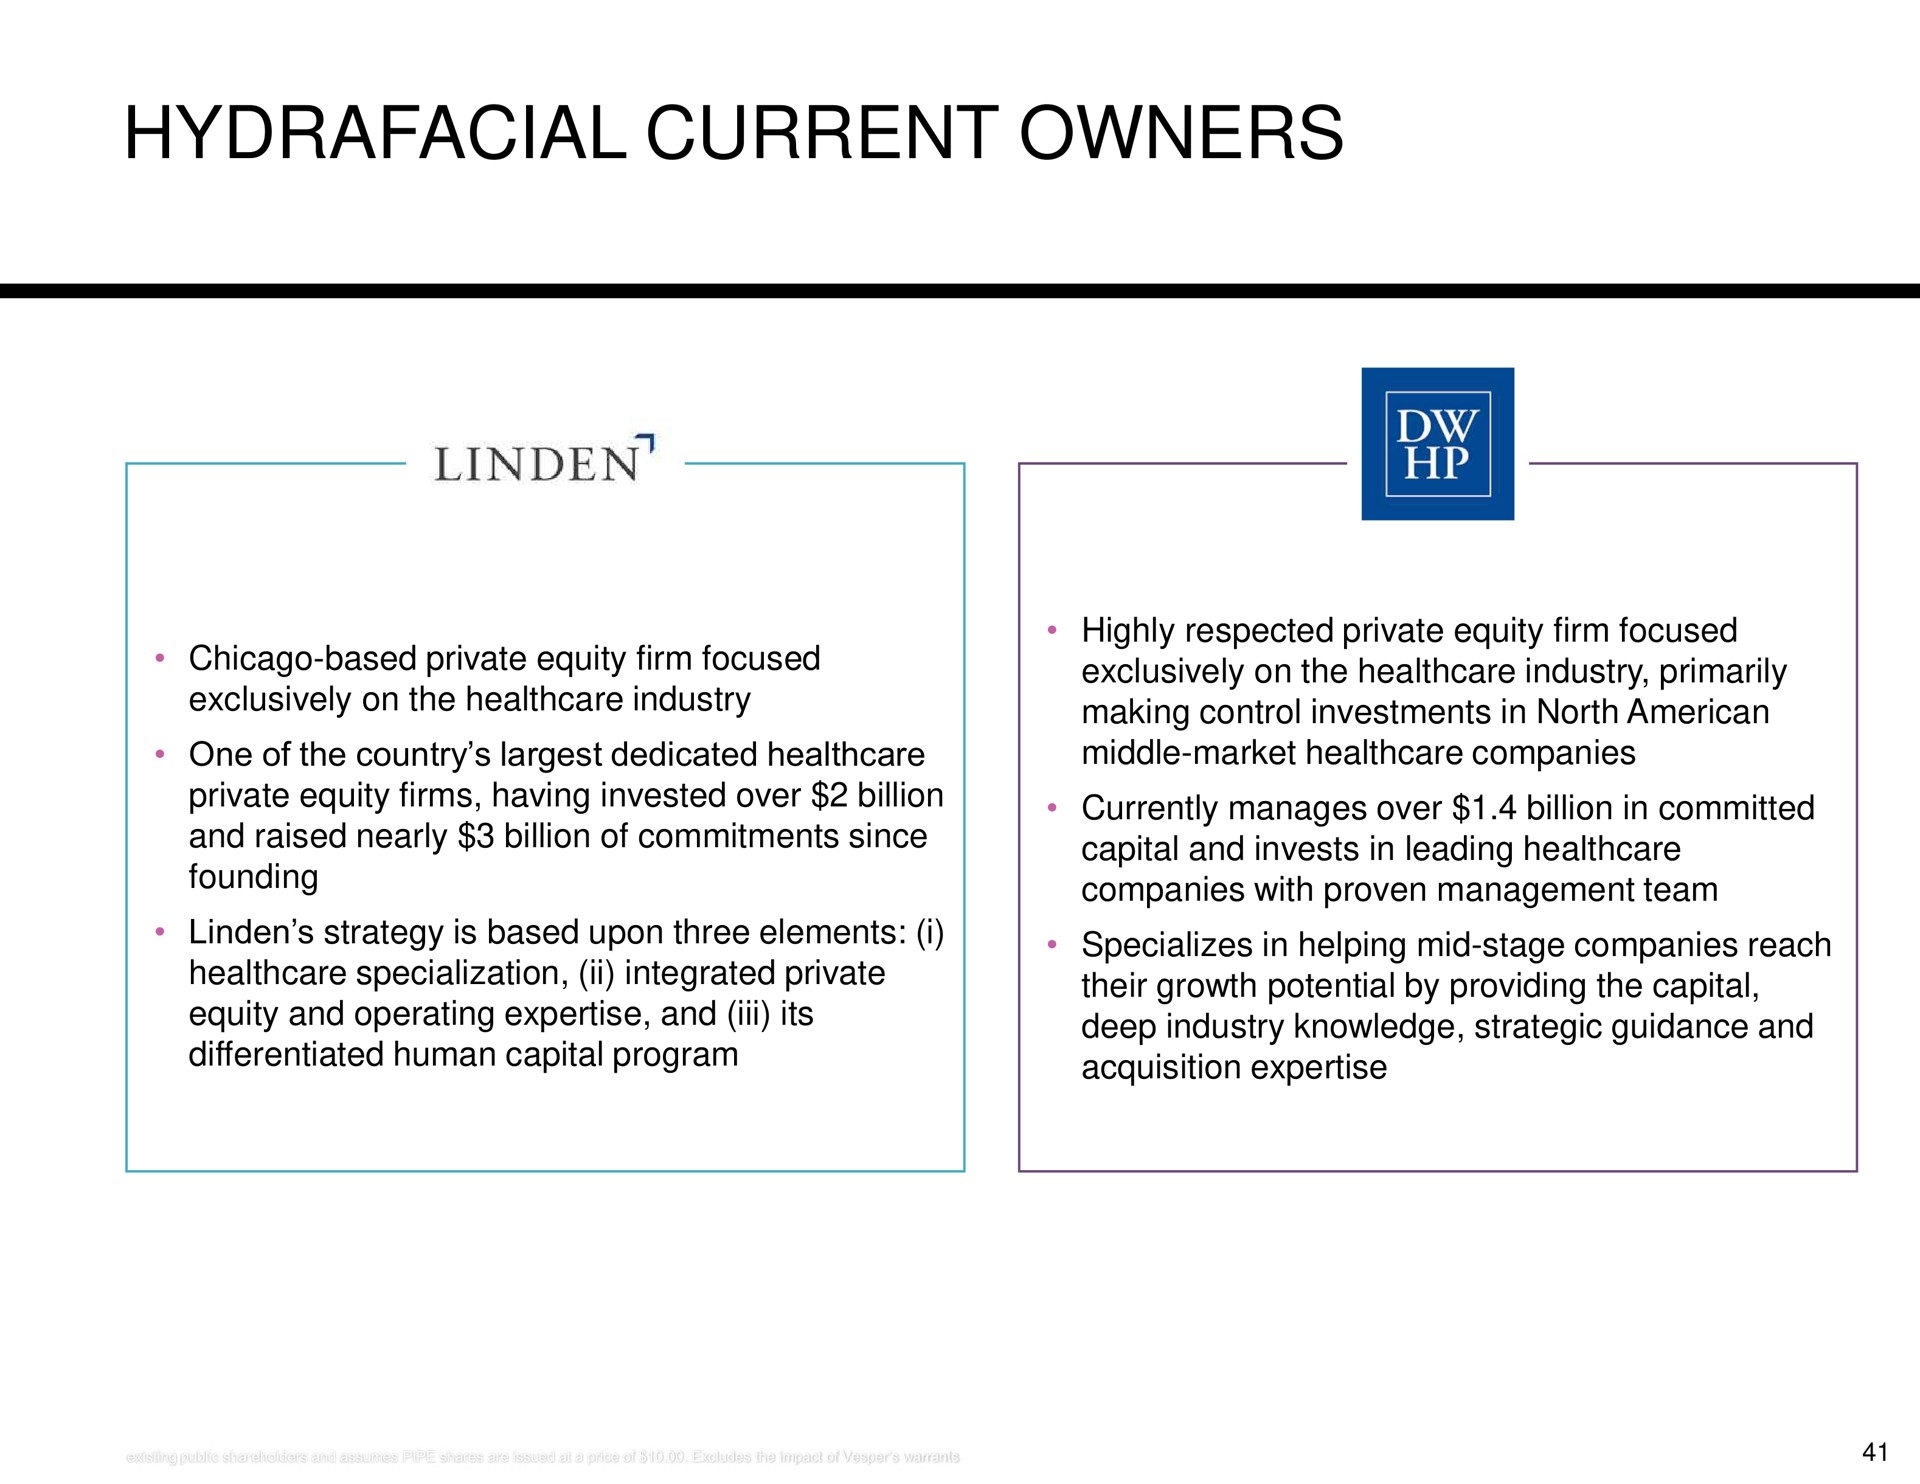 current owners | Hydrafacial